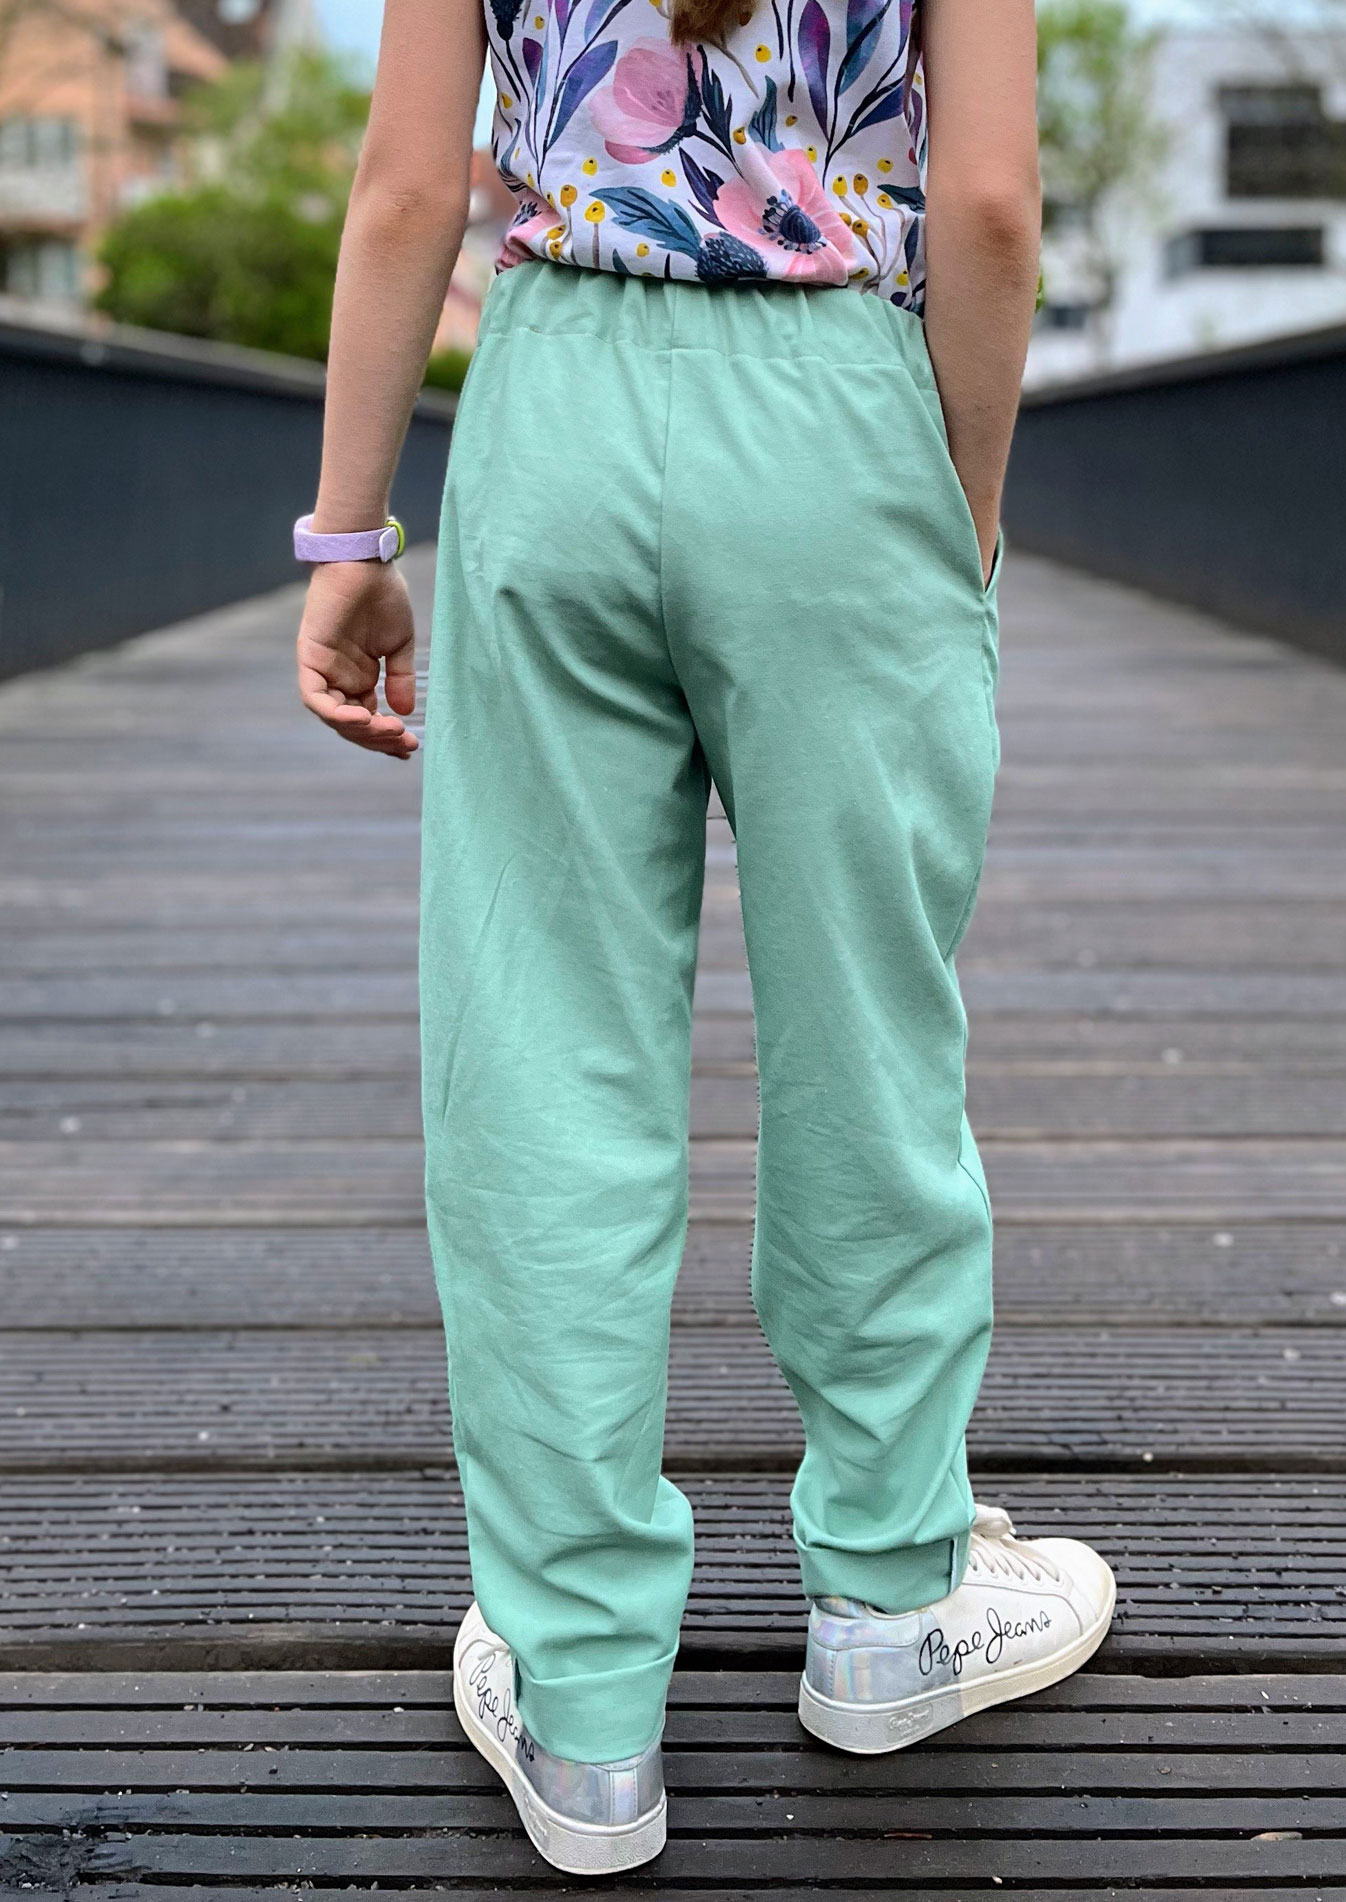 Snyggli-Schnittmuster-Loose-fit-Hose-Solskin-Cord-Canvas-Chino-Leinen-Babys-Kinder-Teens-Junge-Mädchen-Gr-128-170-Cord-Canvas-Leinen-Chino-mint